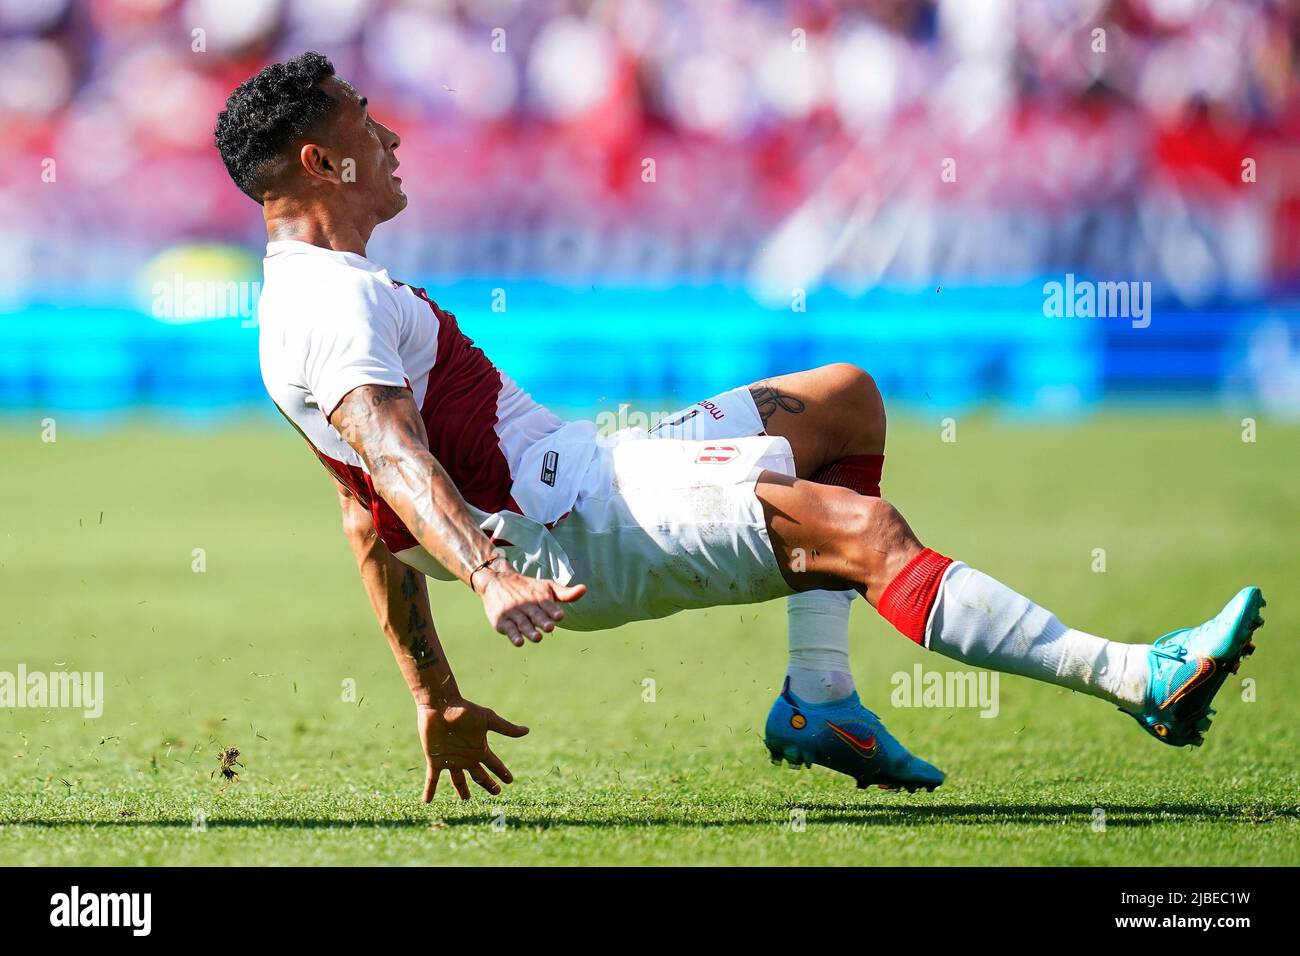 Barcelona, Spain. June 5, 2022, Yoshimar Yotun of Peru during the friendly match between Peru and New Zealand played at RCDE Stadium on June 5, 2022 in Barcelona, Spain. (Photo by Bagu Blanco / PRESSINPHOTO) Stock Photo